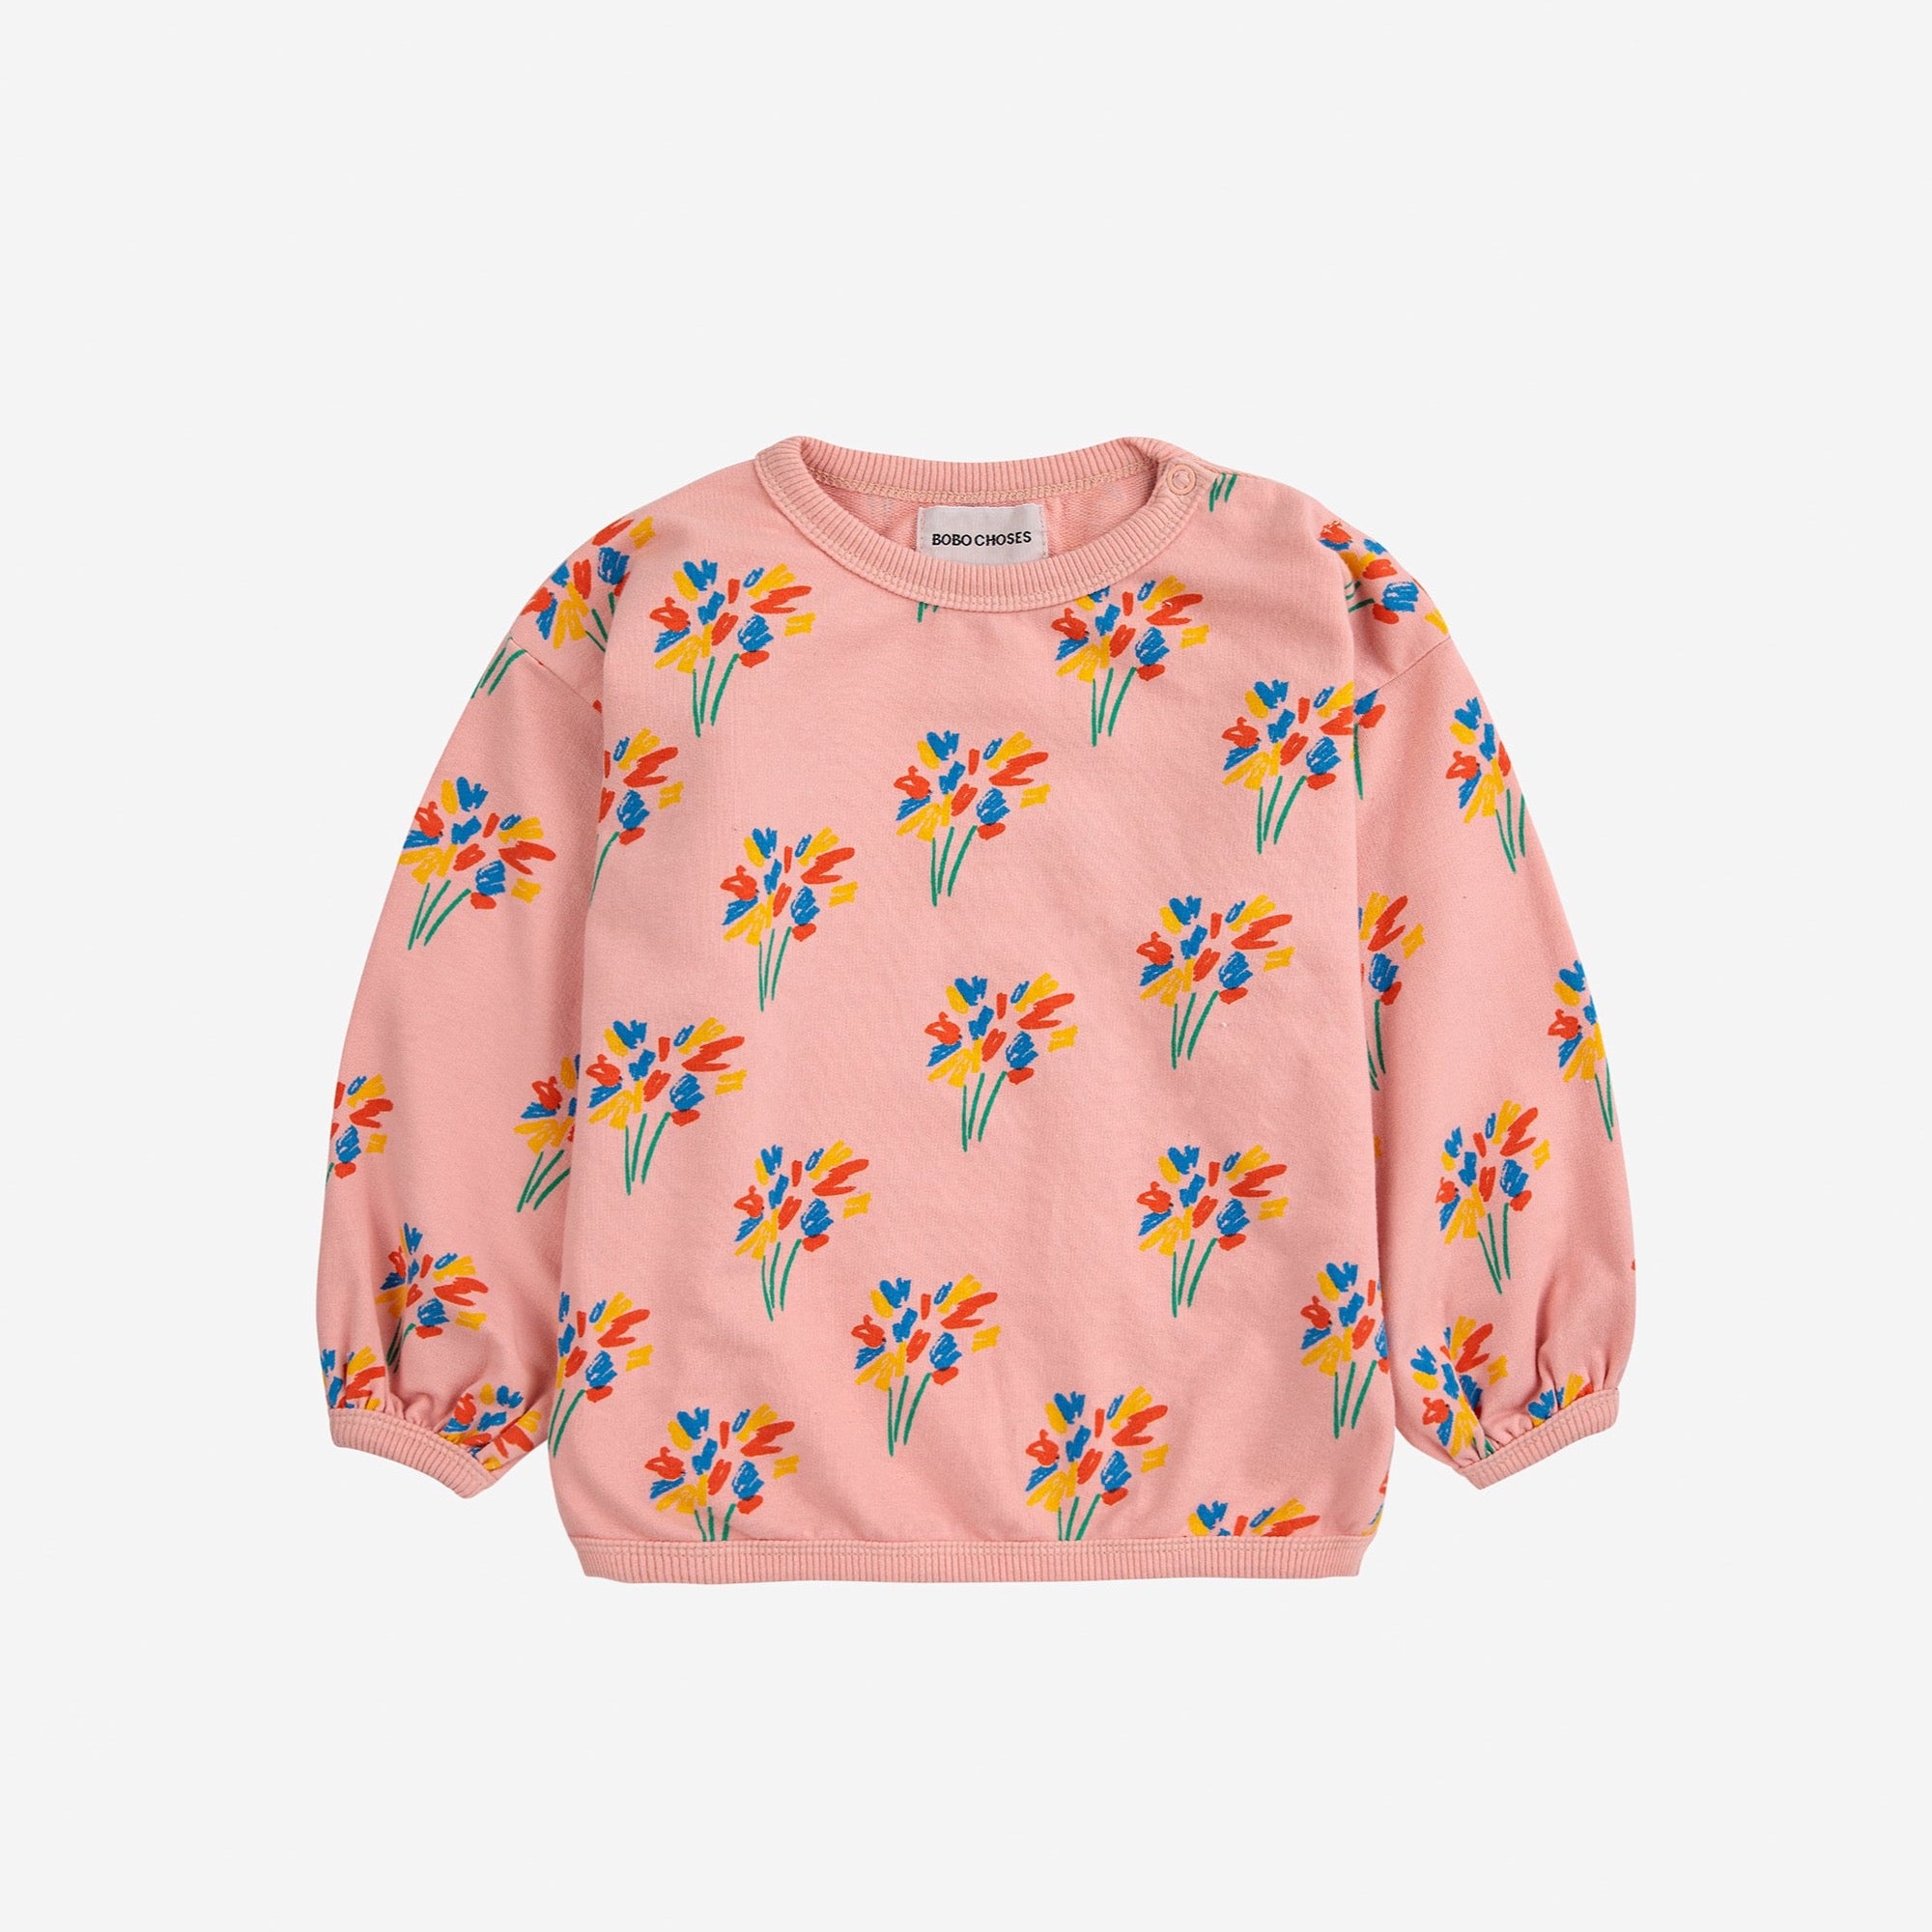 child wearing pink sweatshirt with colorful firework print